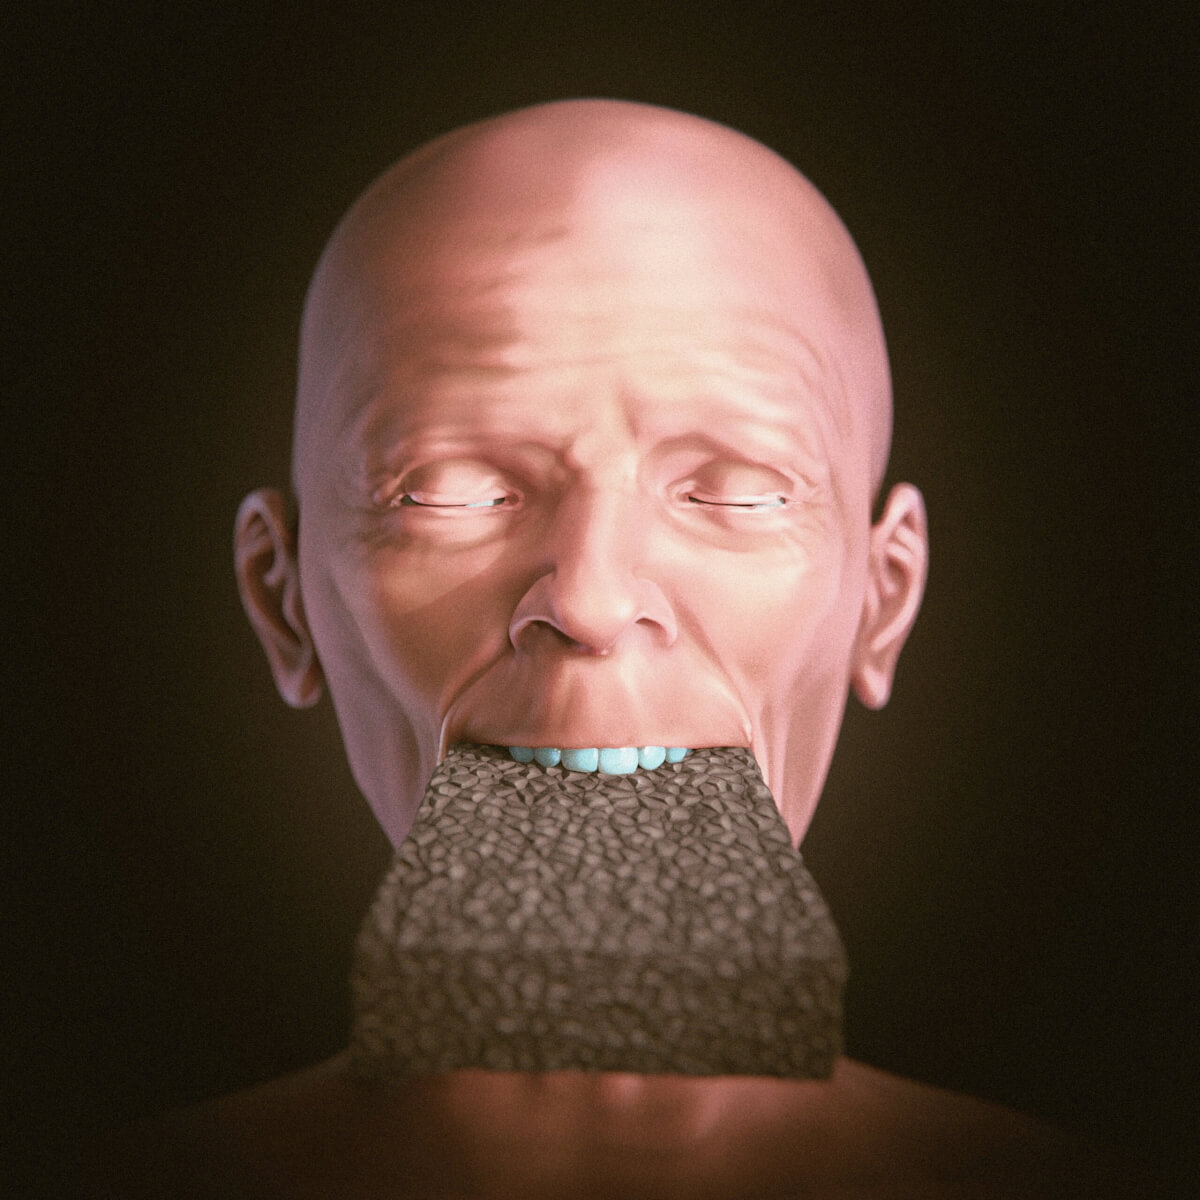 Recreation of the woman's face using 3D software allowed examination whether a brick could have been inserted into her mouth. 